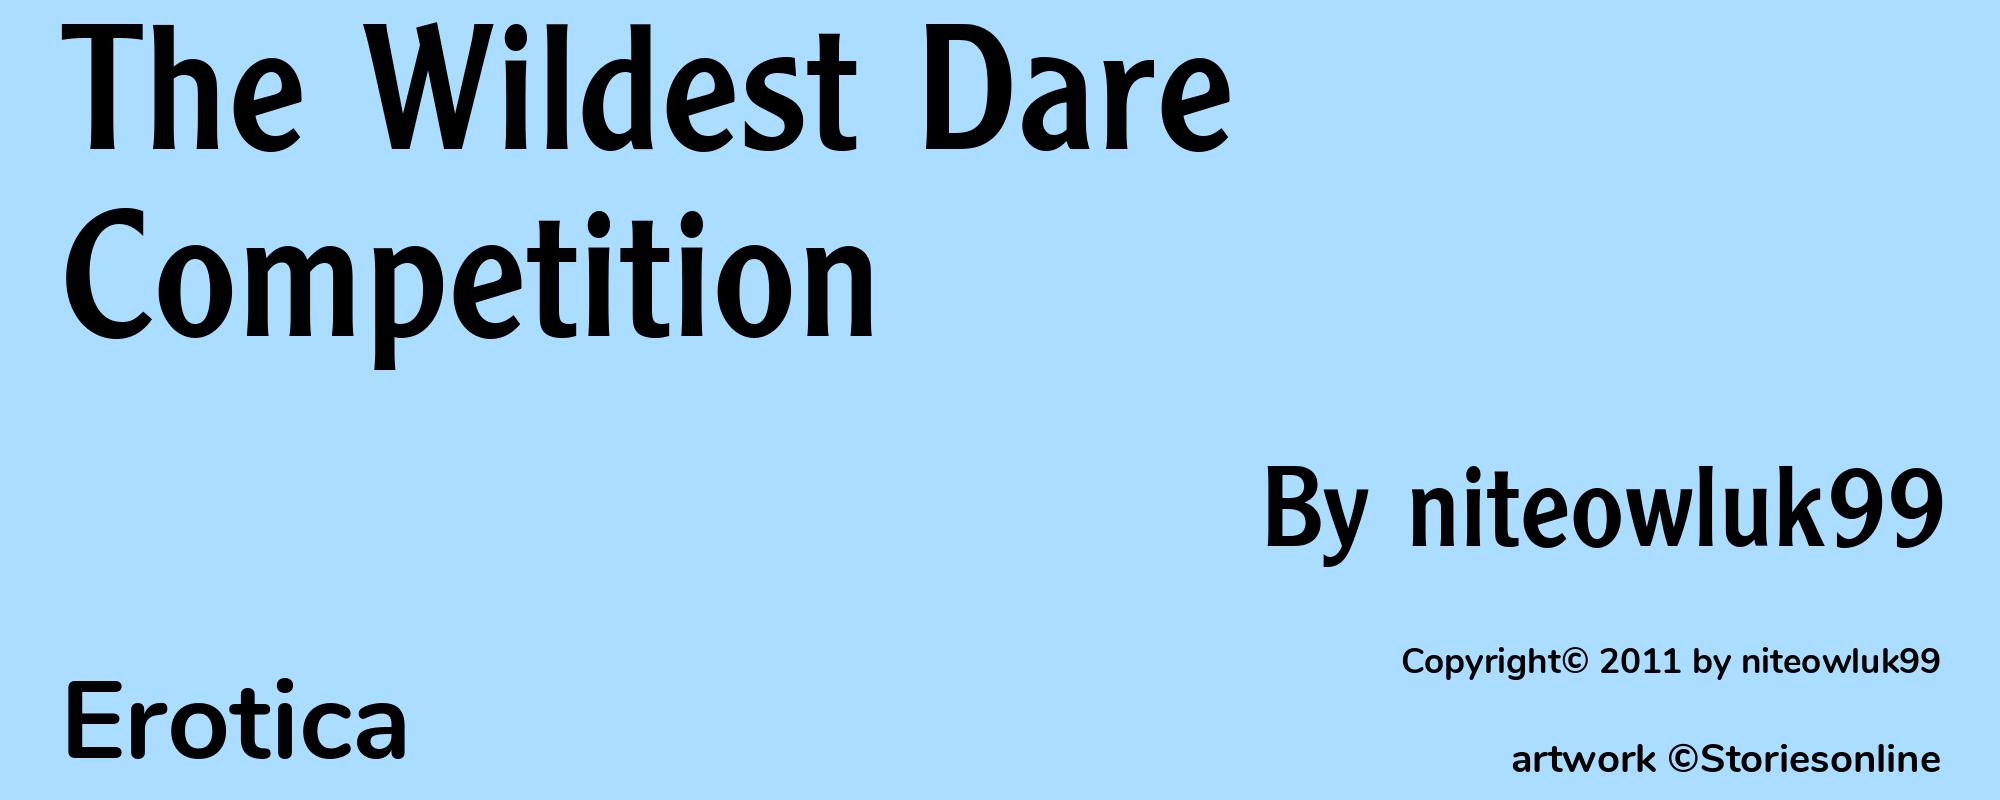 The Wildest Dare Competition - Cover